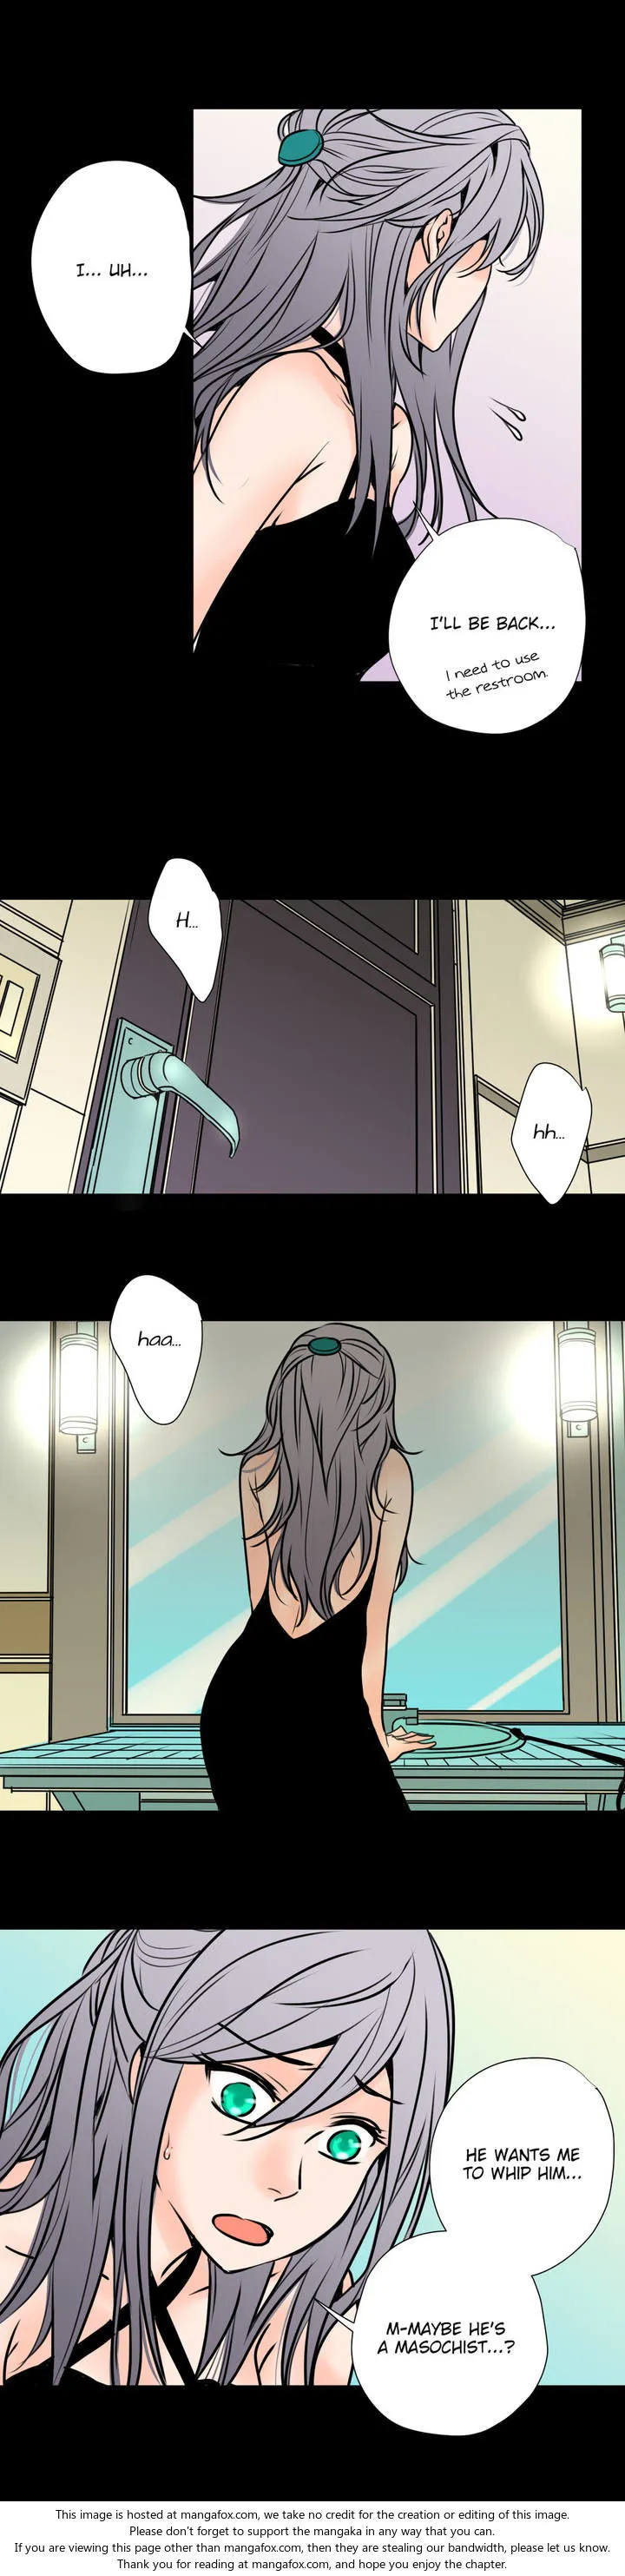 Pulse Chapter 043 page 7